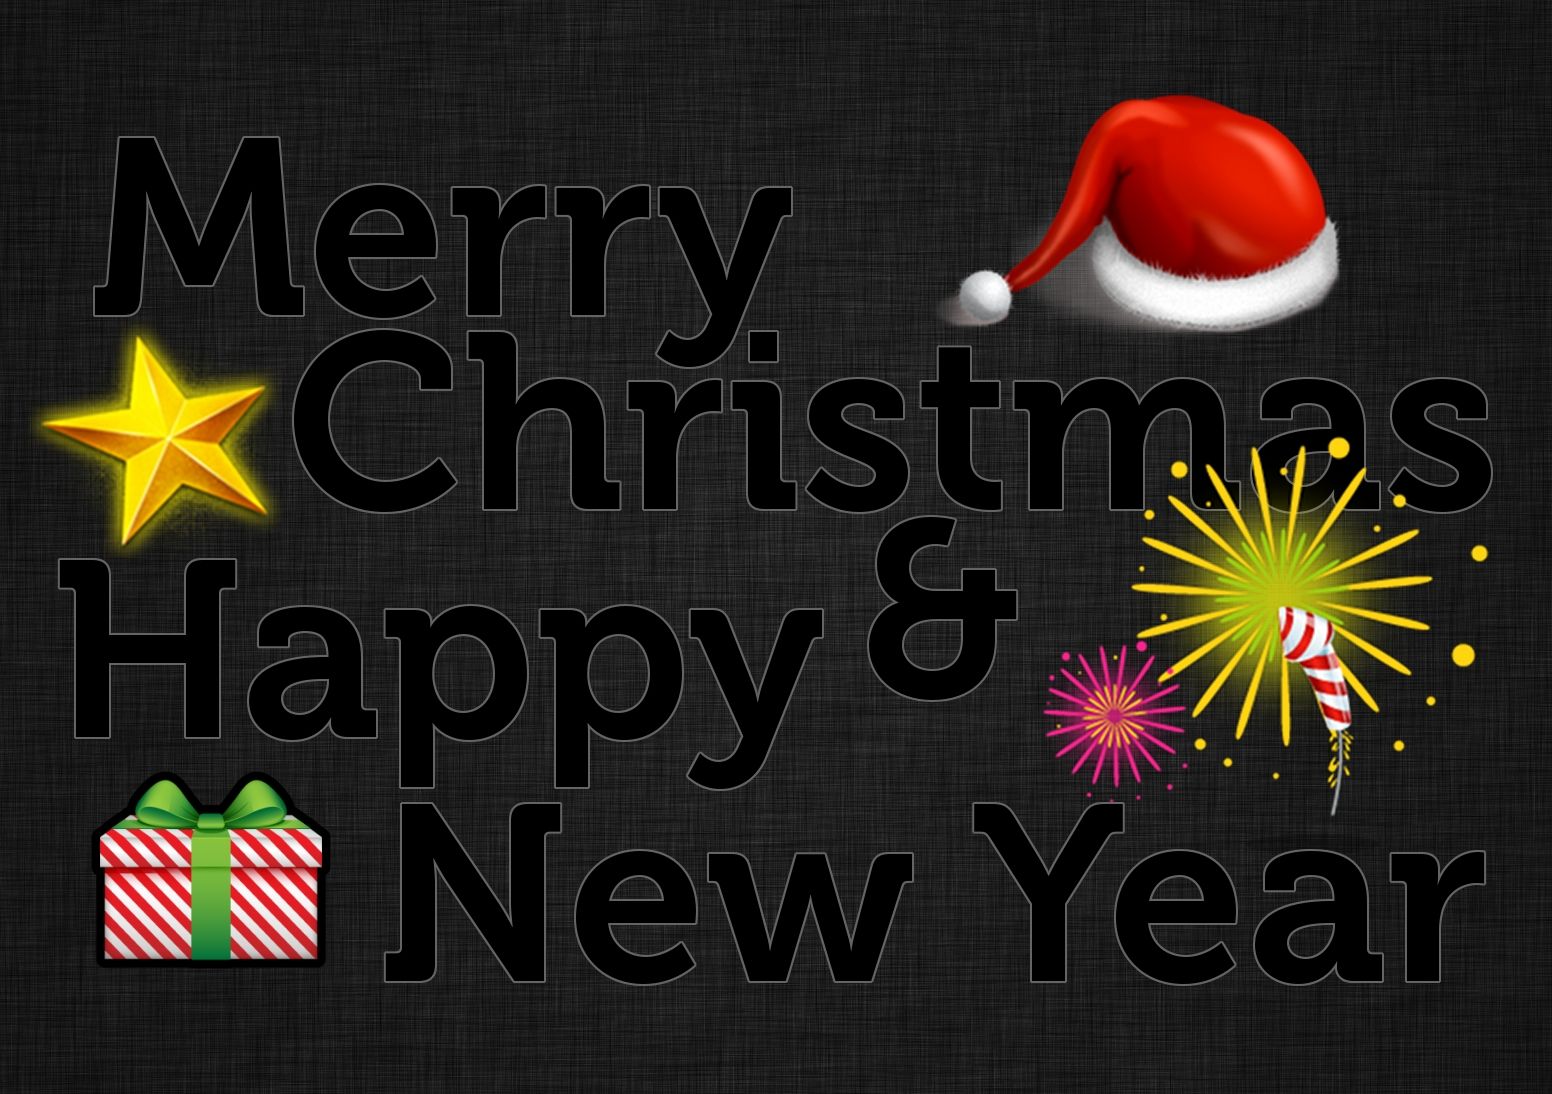 Index Of Image Merry Christmas Happy New Year Wallpaper In Gimp